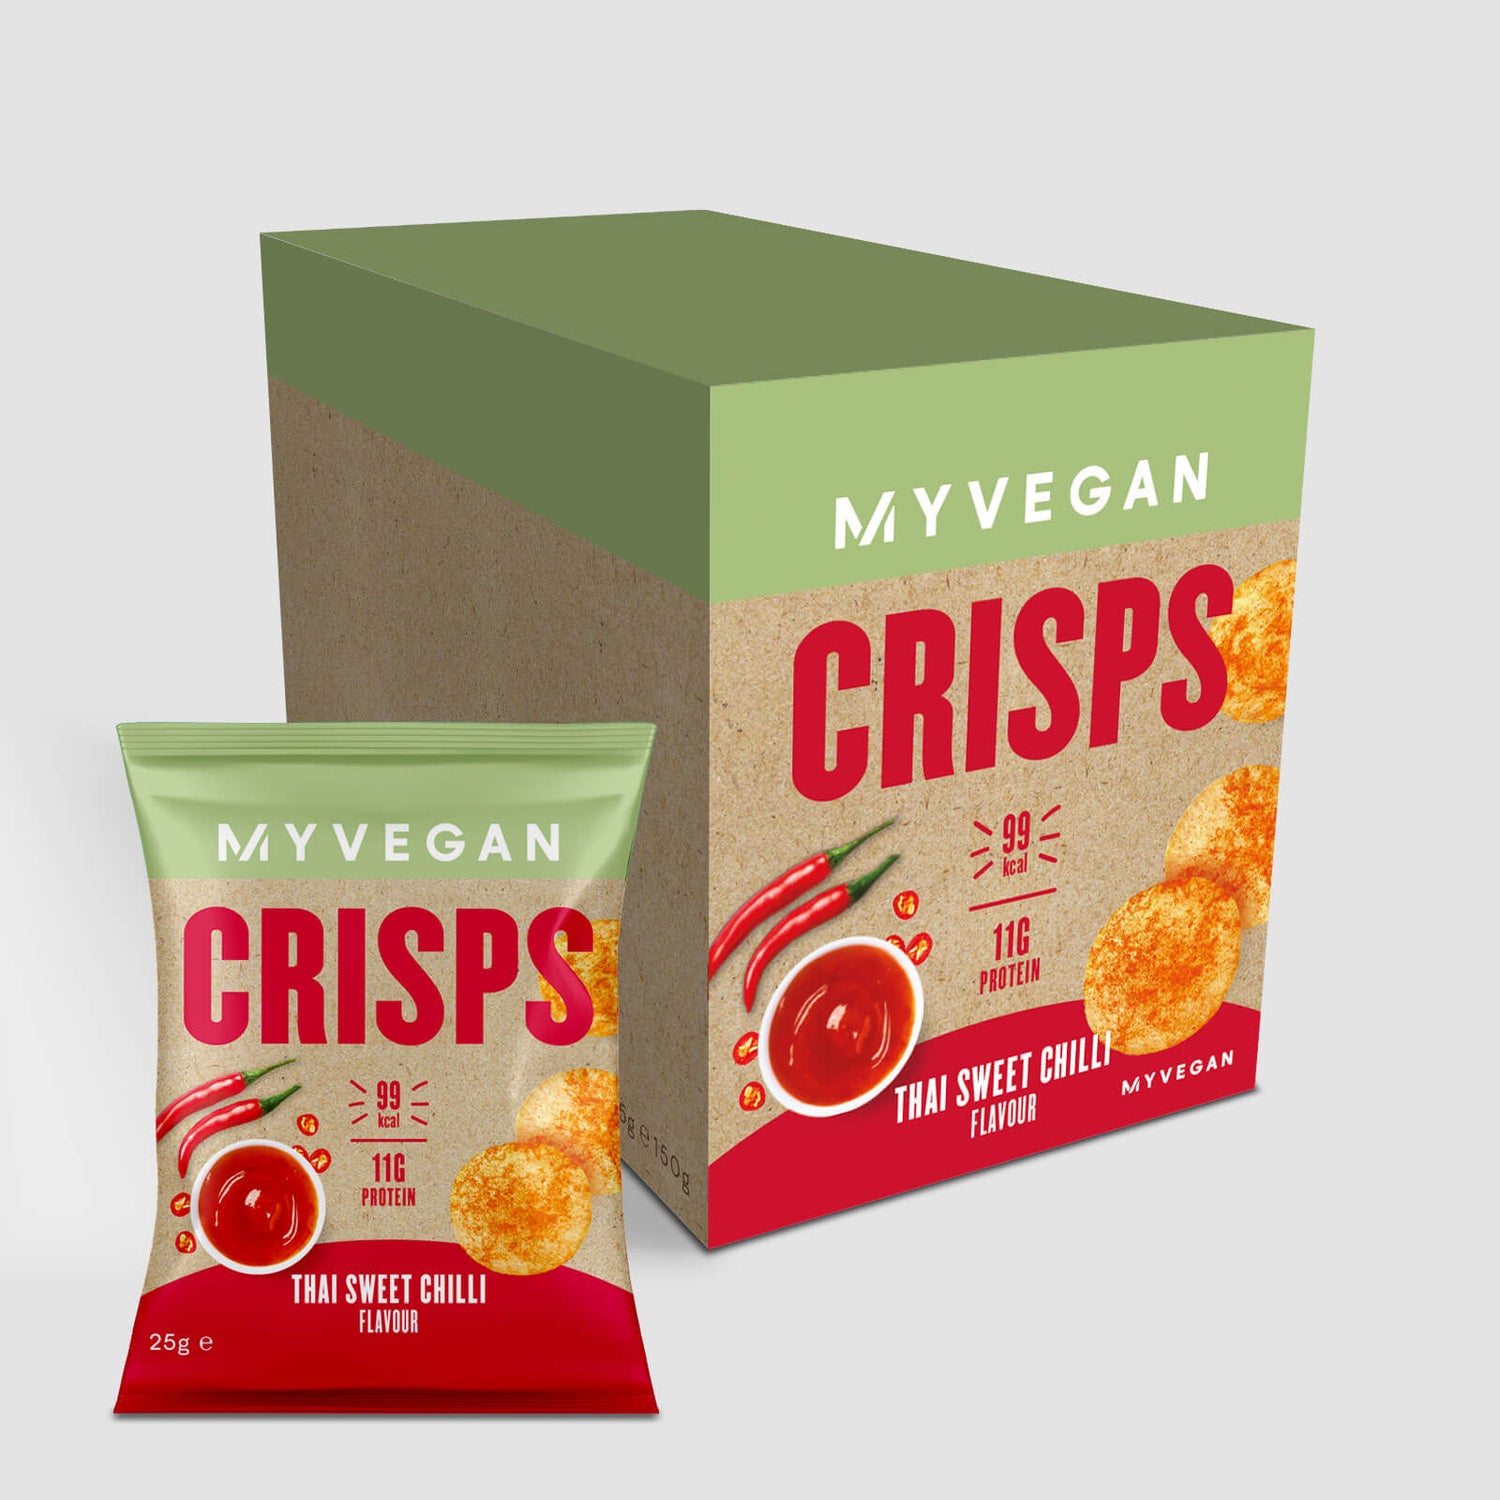 Popped Protein Crisps (6 Pack)